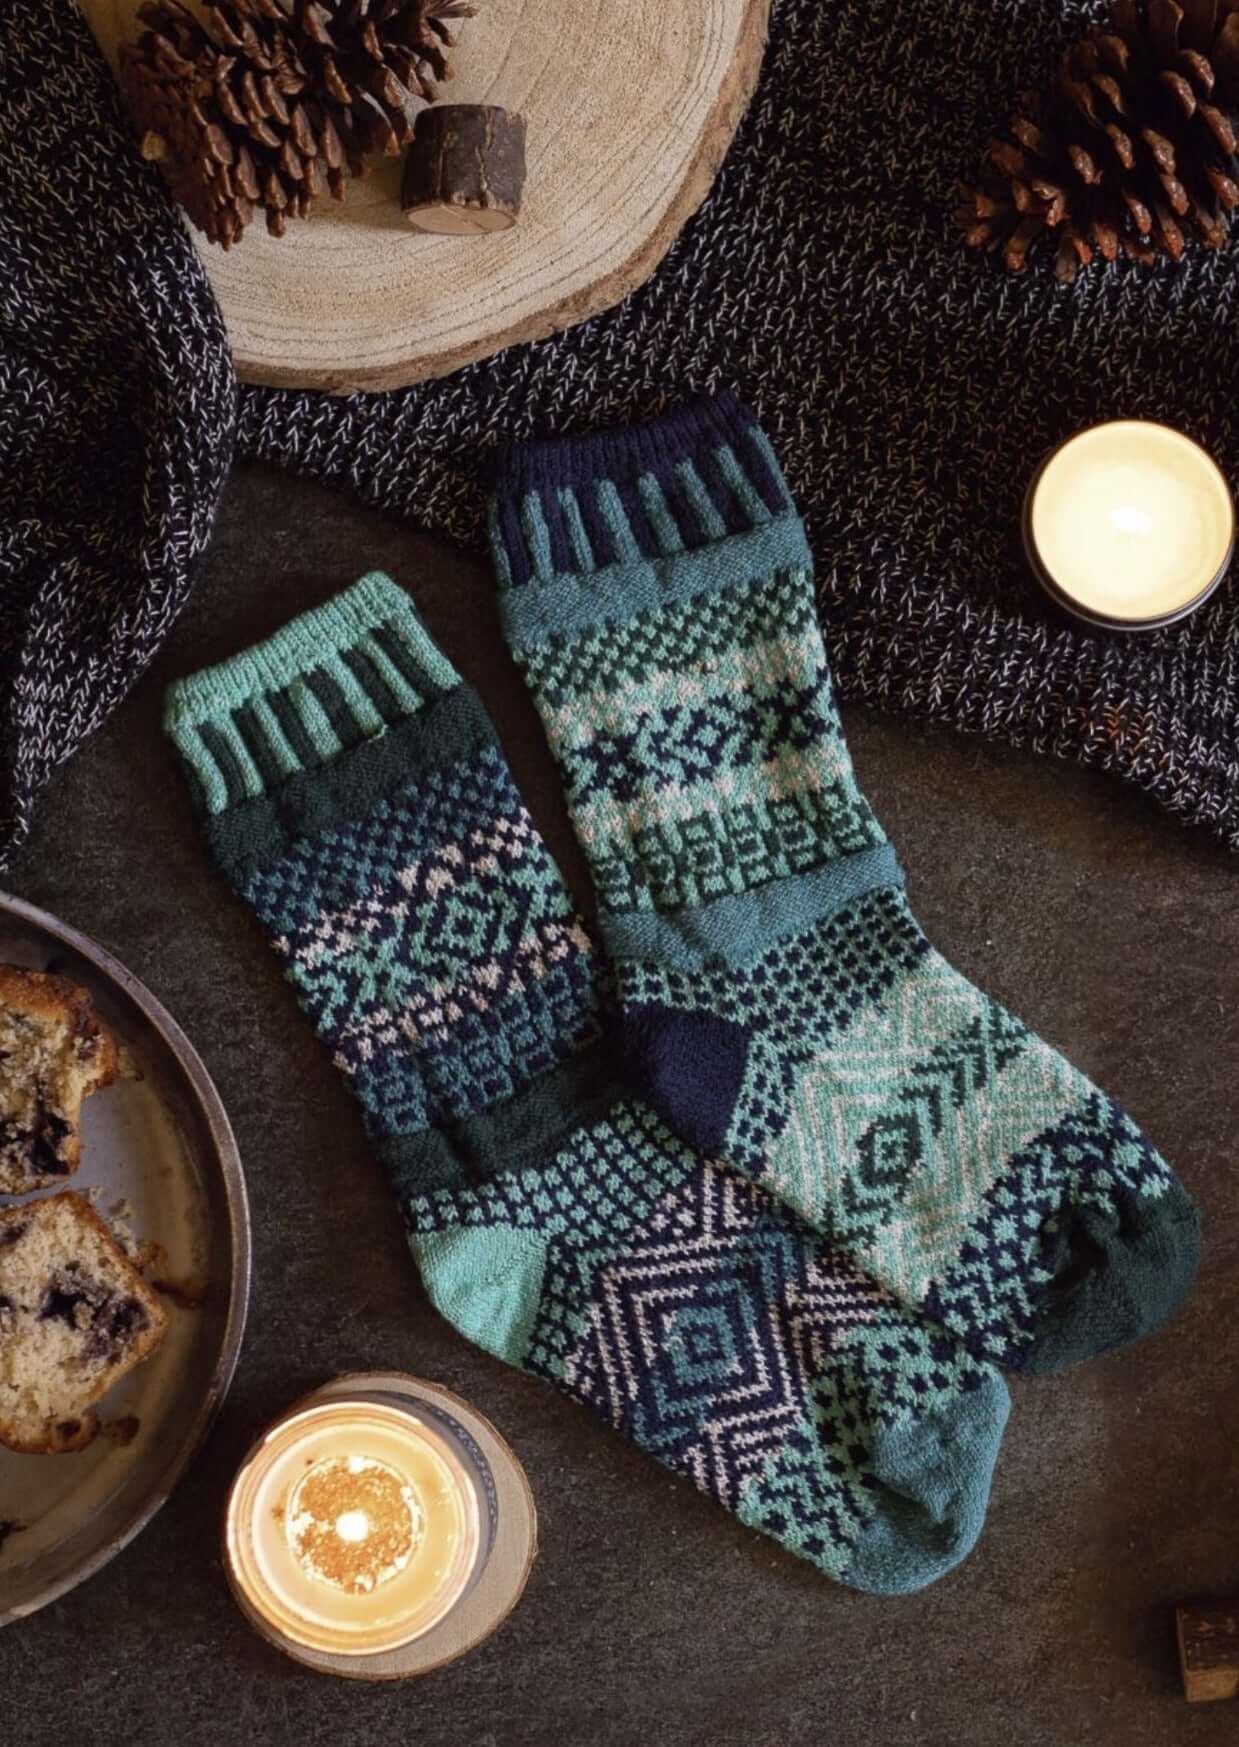 Solmate Socks EVERGREEN Knitted Crew Socks Proudly Made USA | These socks are delightfully mismatched & so very comfortable. American Made Clothing